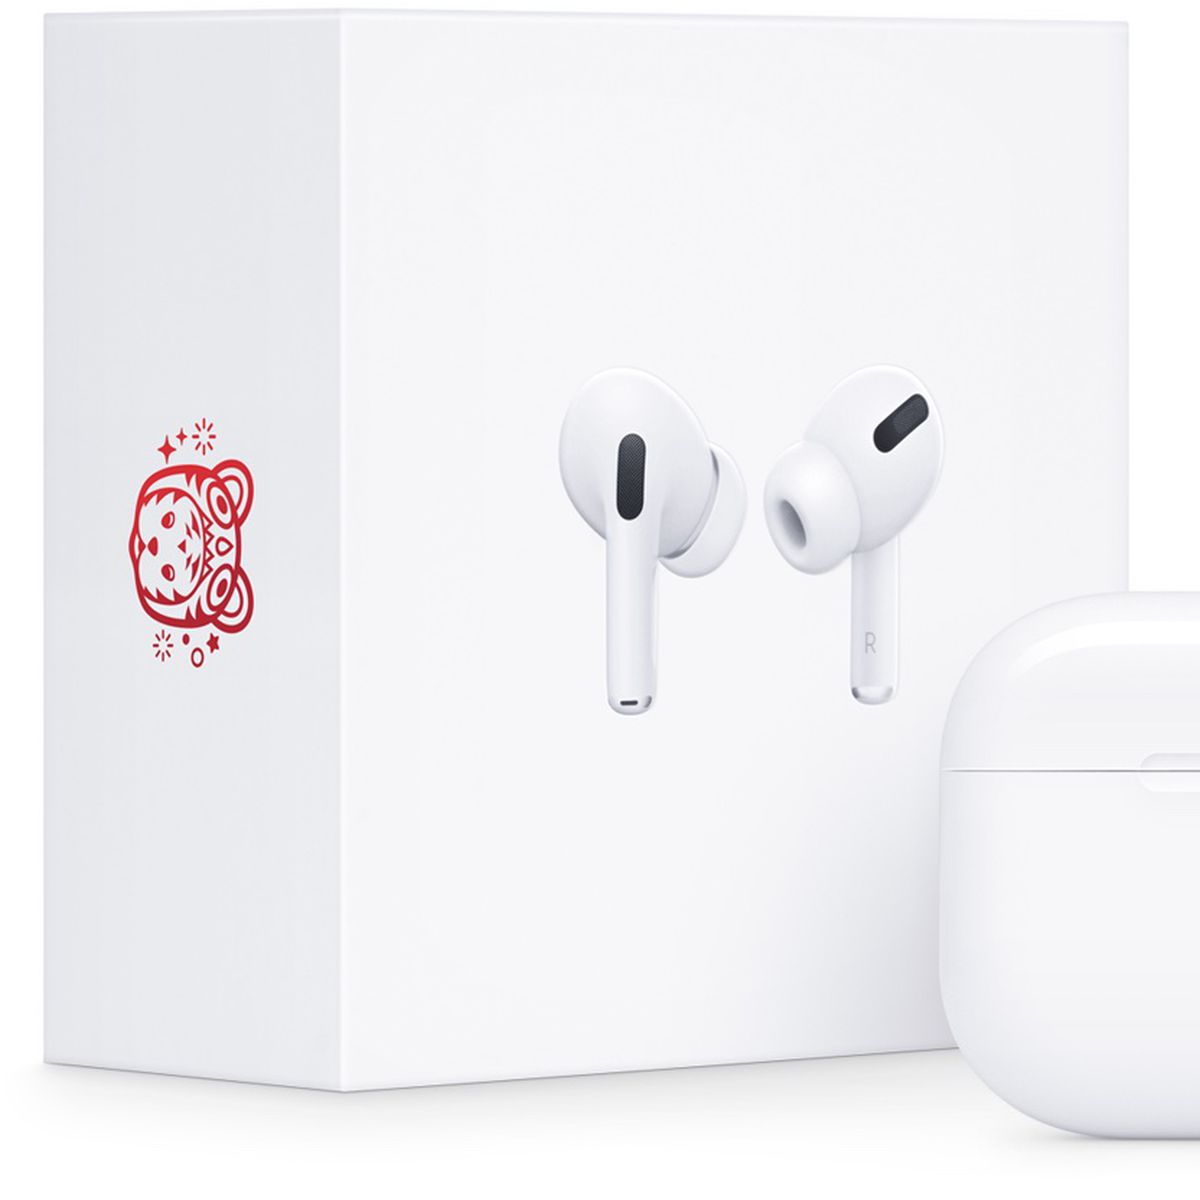 Apple Celebrates Chinese New Year With Special-Edition AirPods Pro 